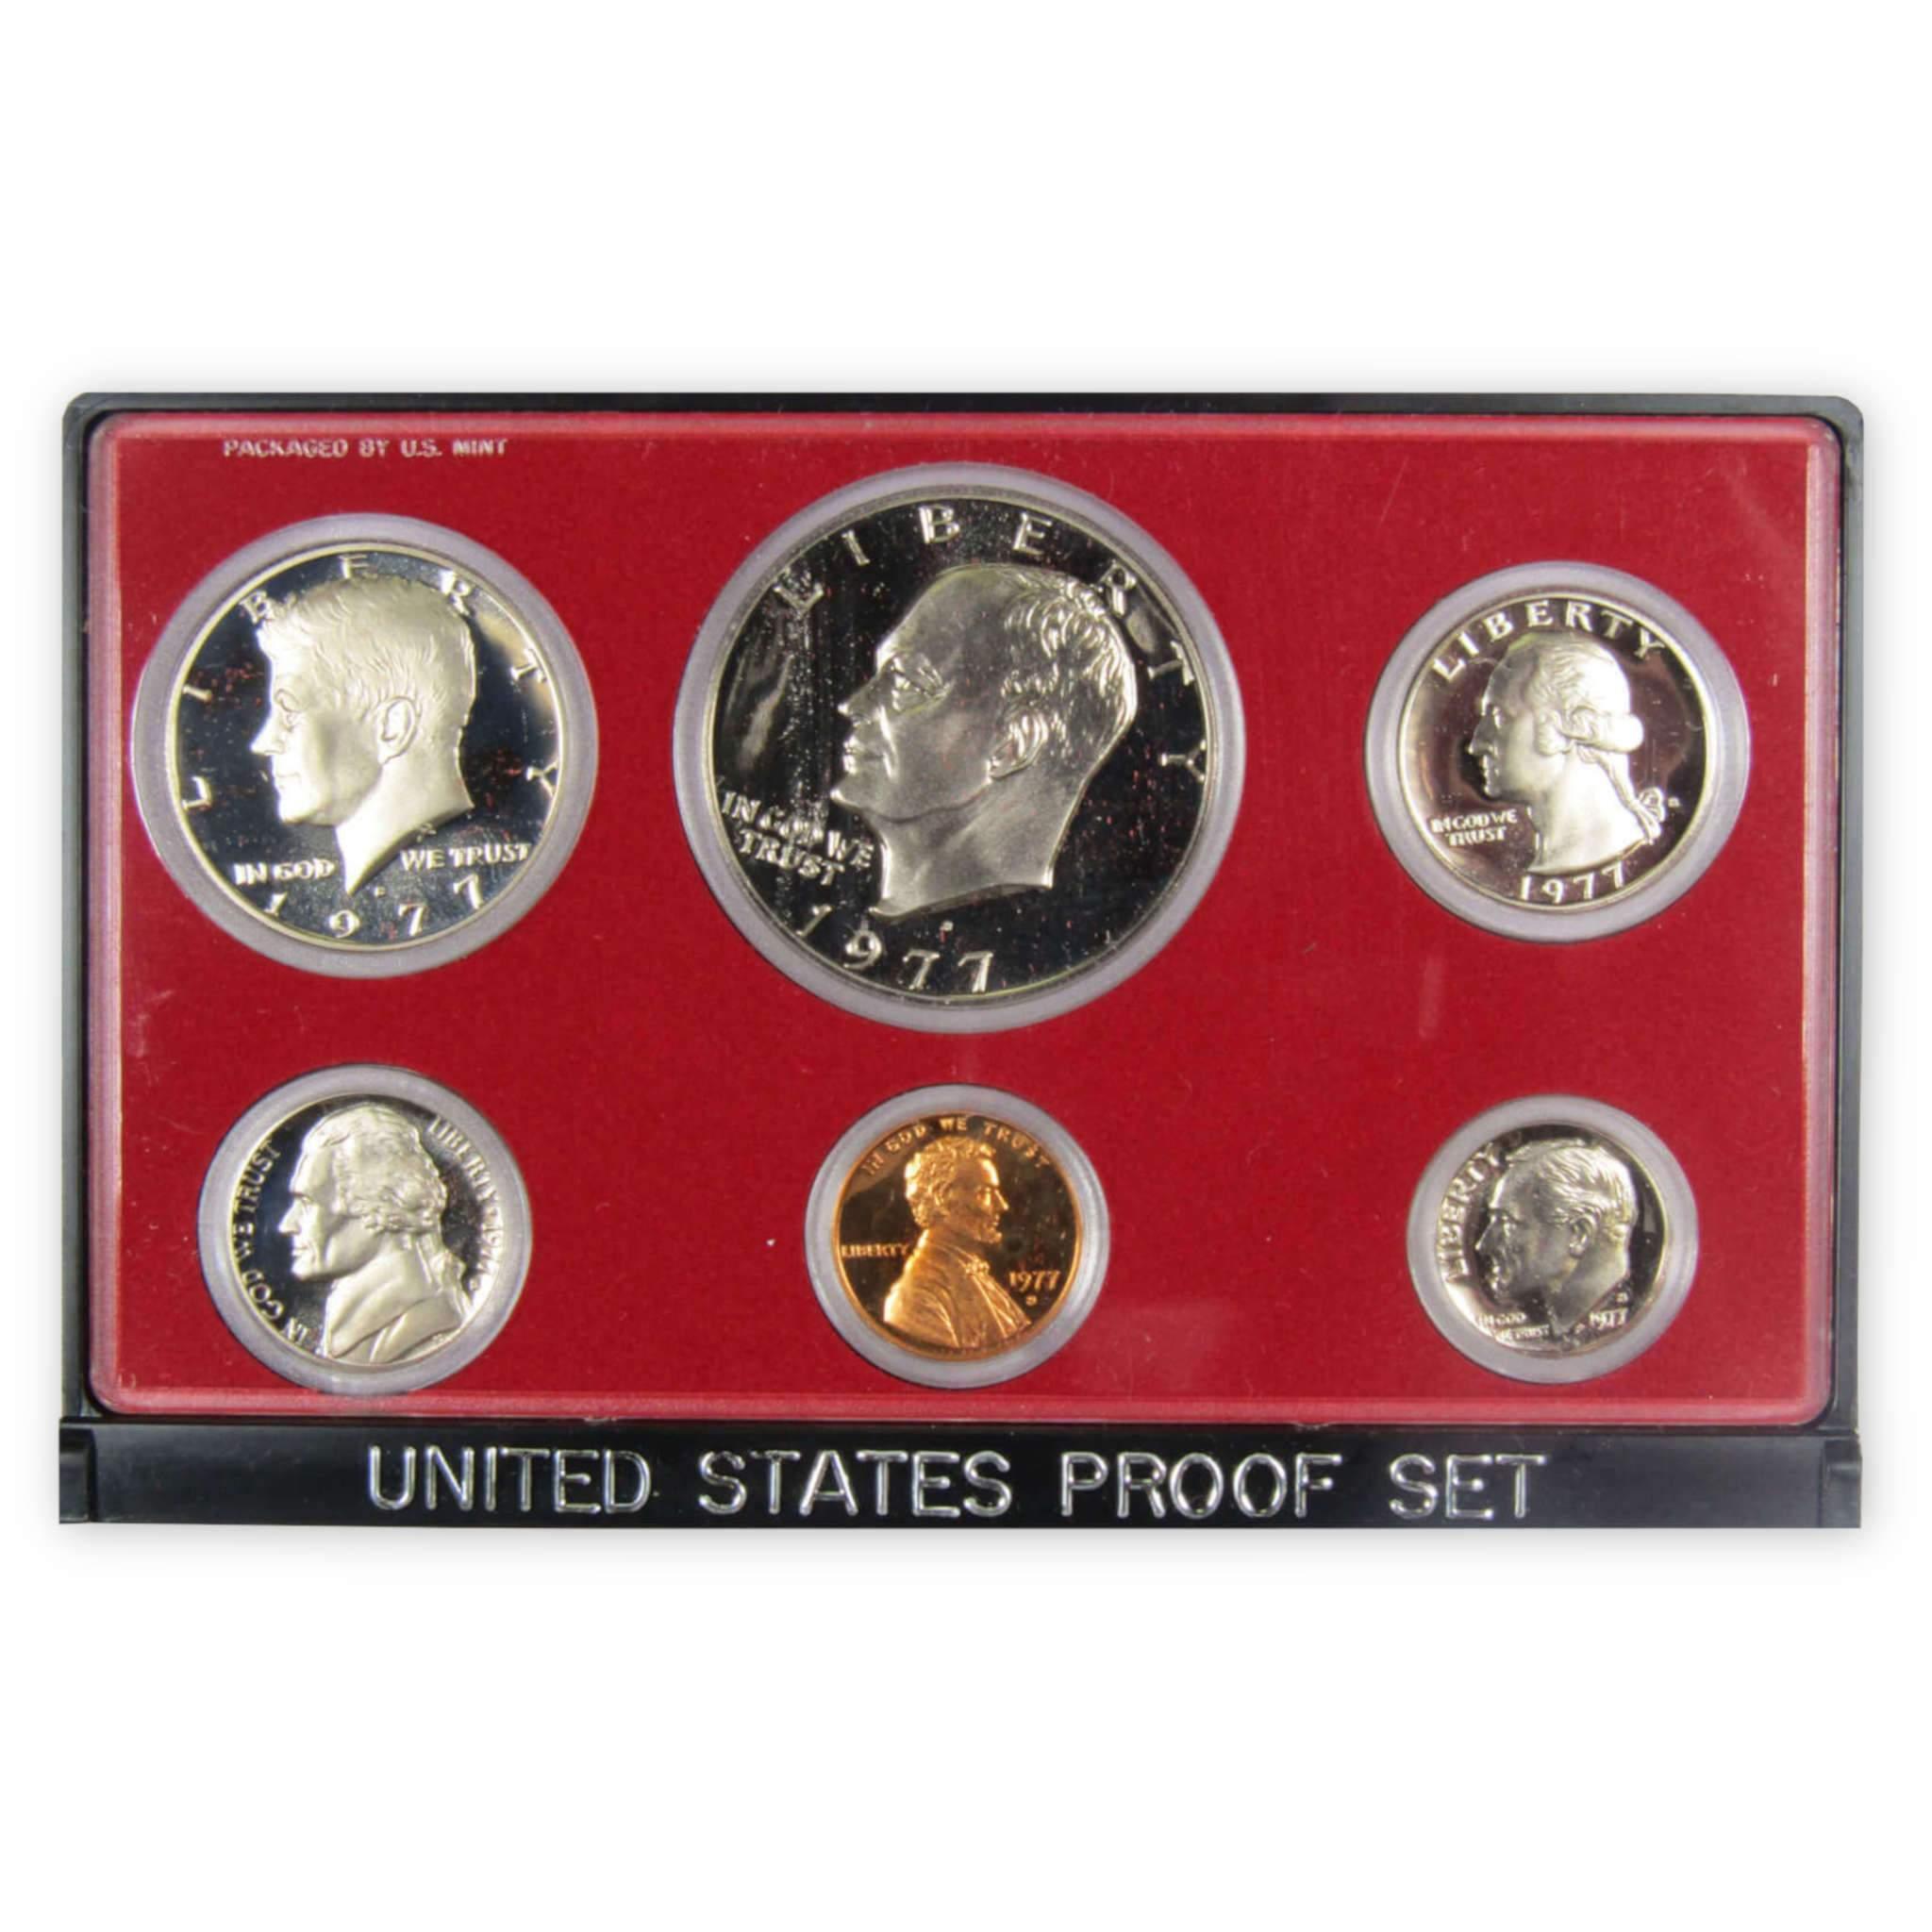 1977 Proof Set U.S. Mint Original Government Packaging OGP Collectible